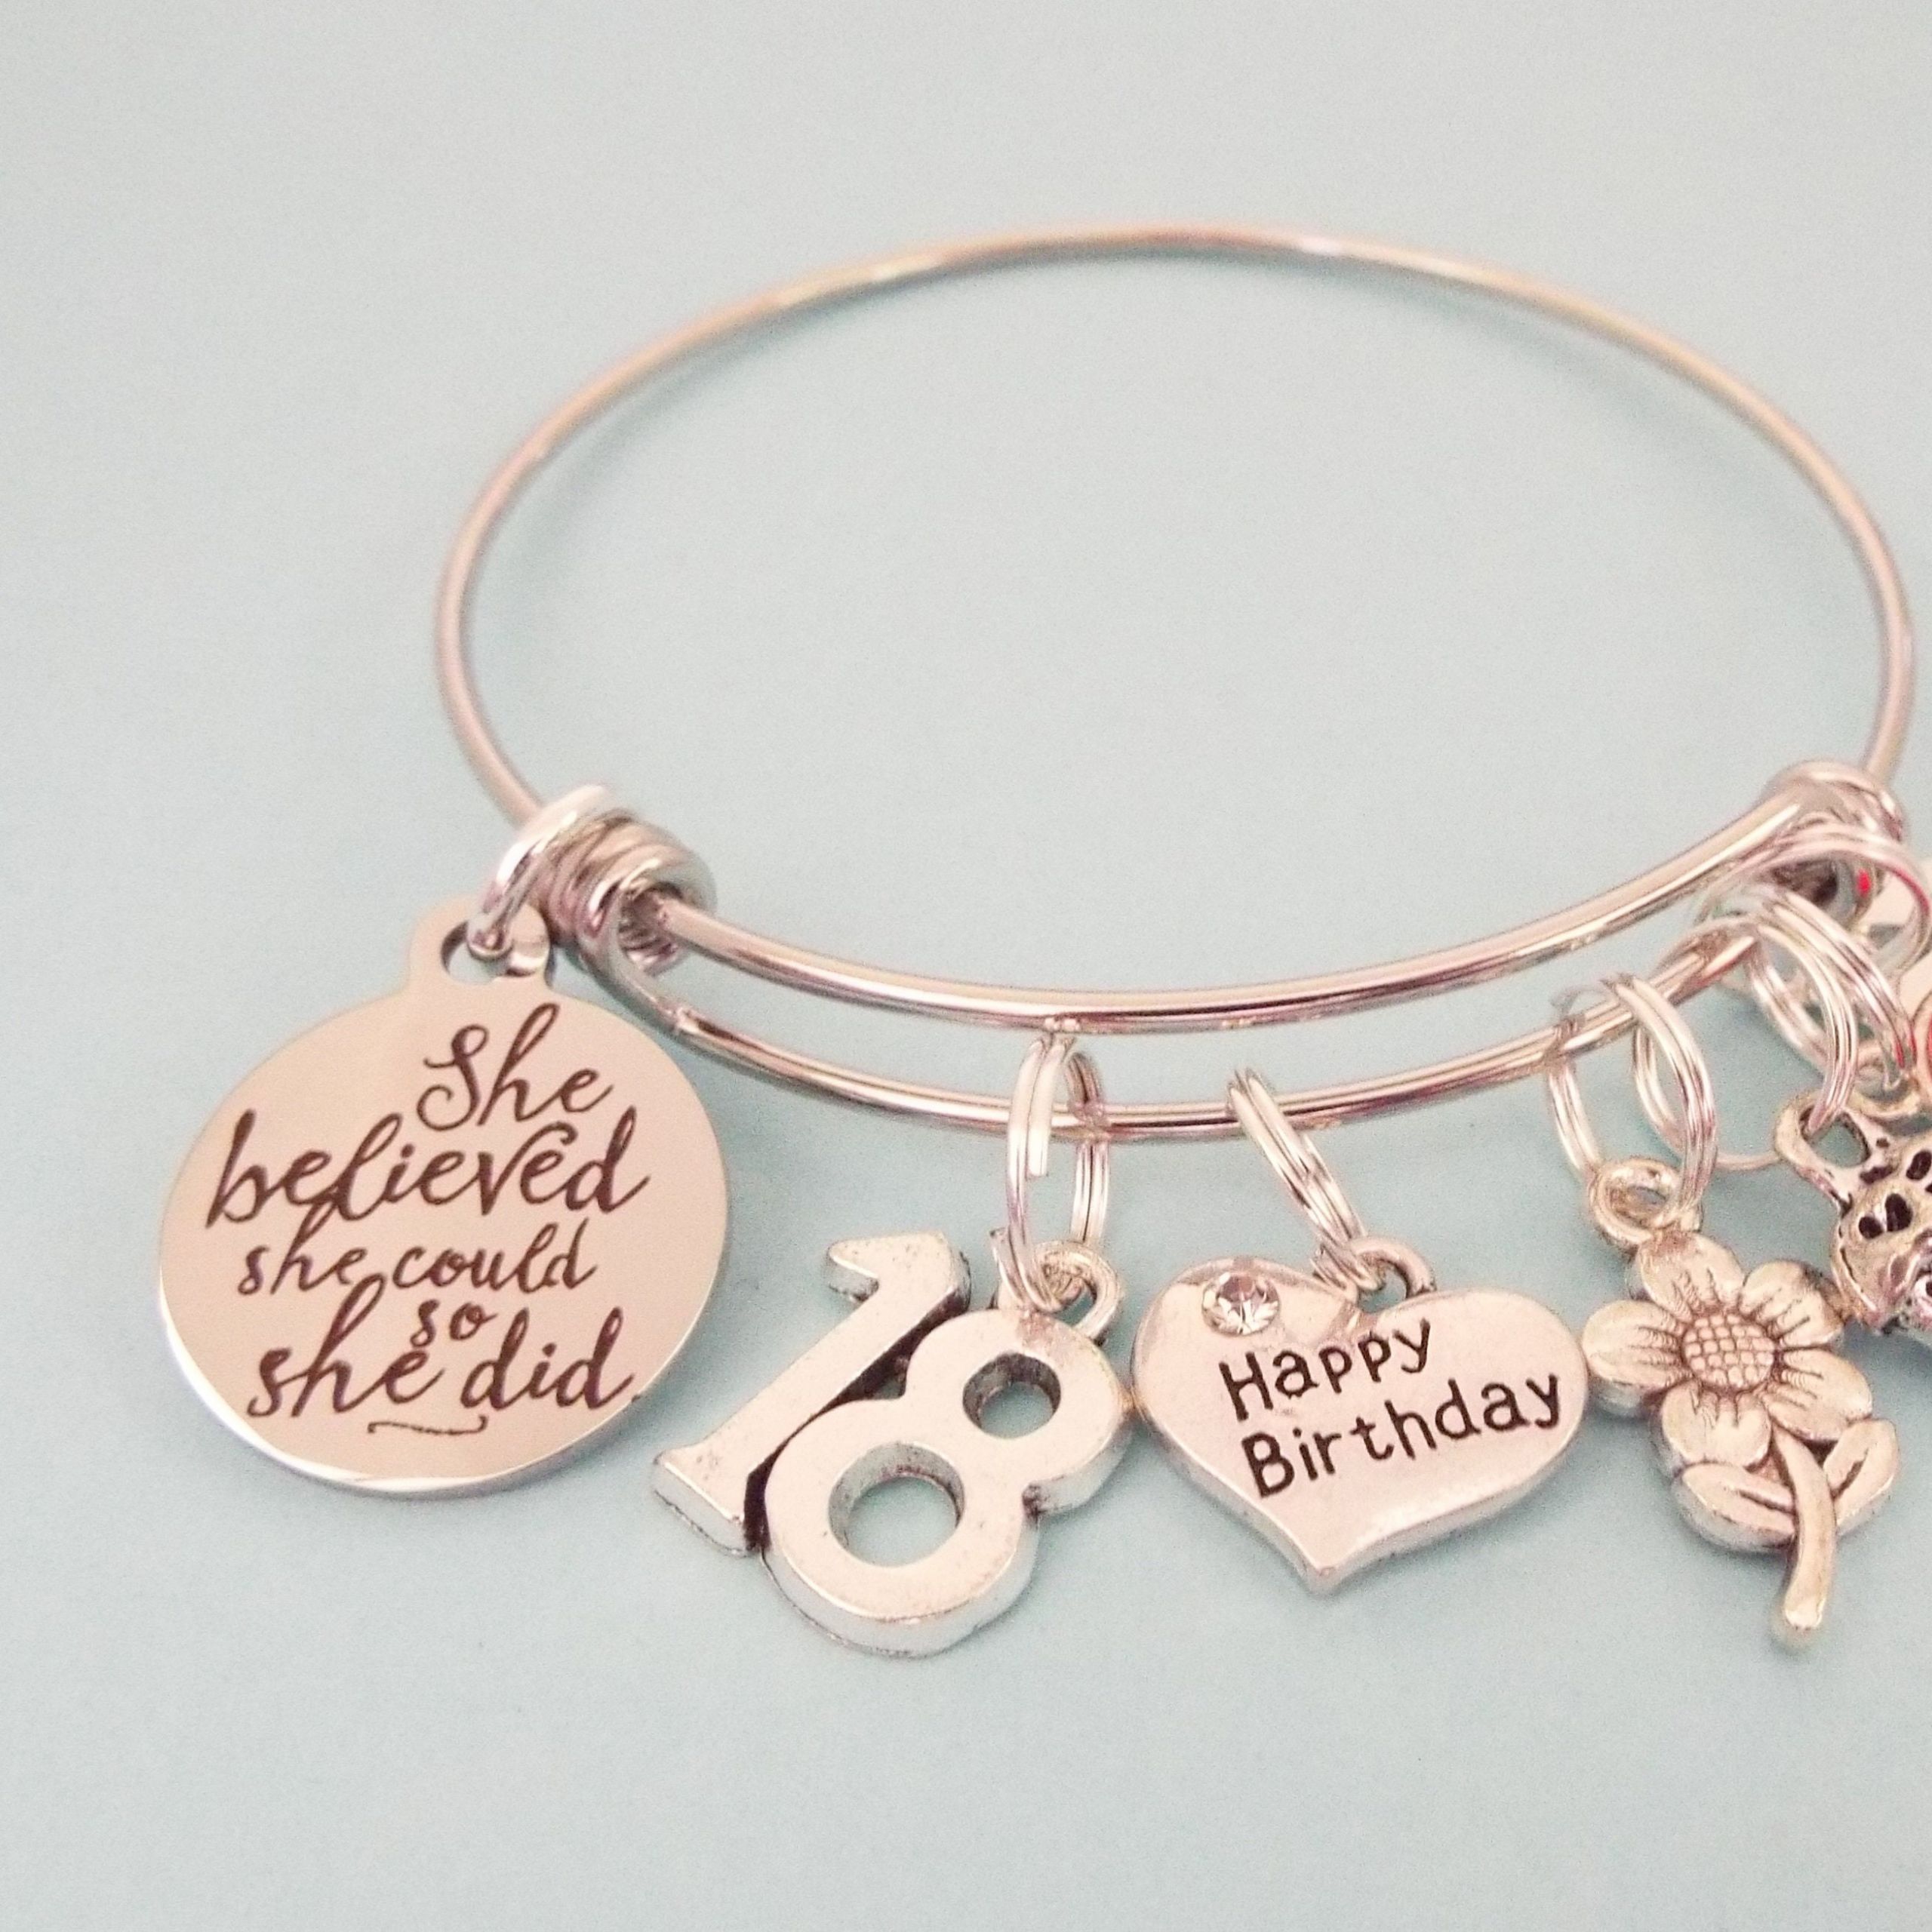 Girlfriend Jewelry Gift Ideas
 18th Birthday Gift for Girl Personalized Charm Bracelet